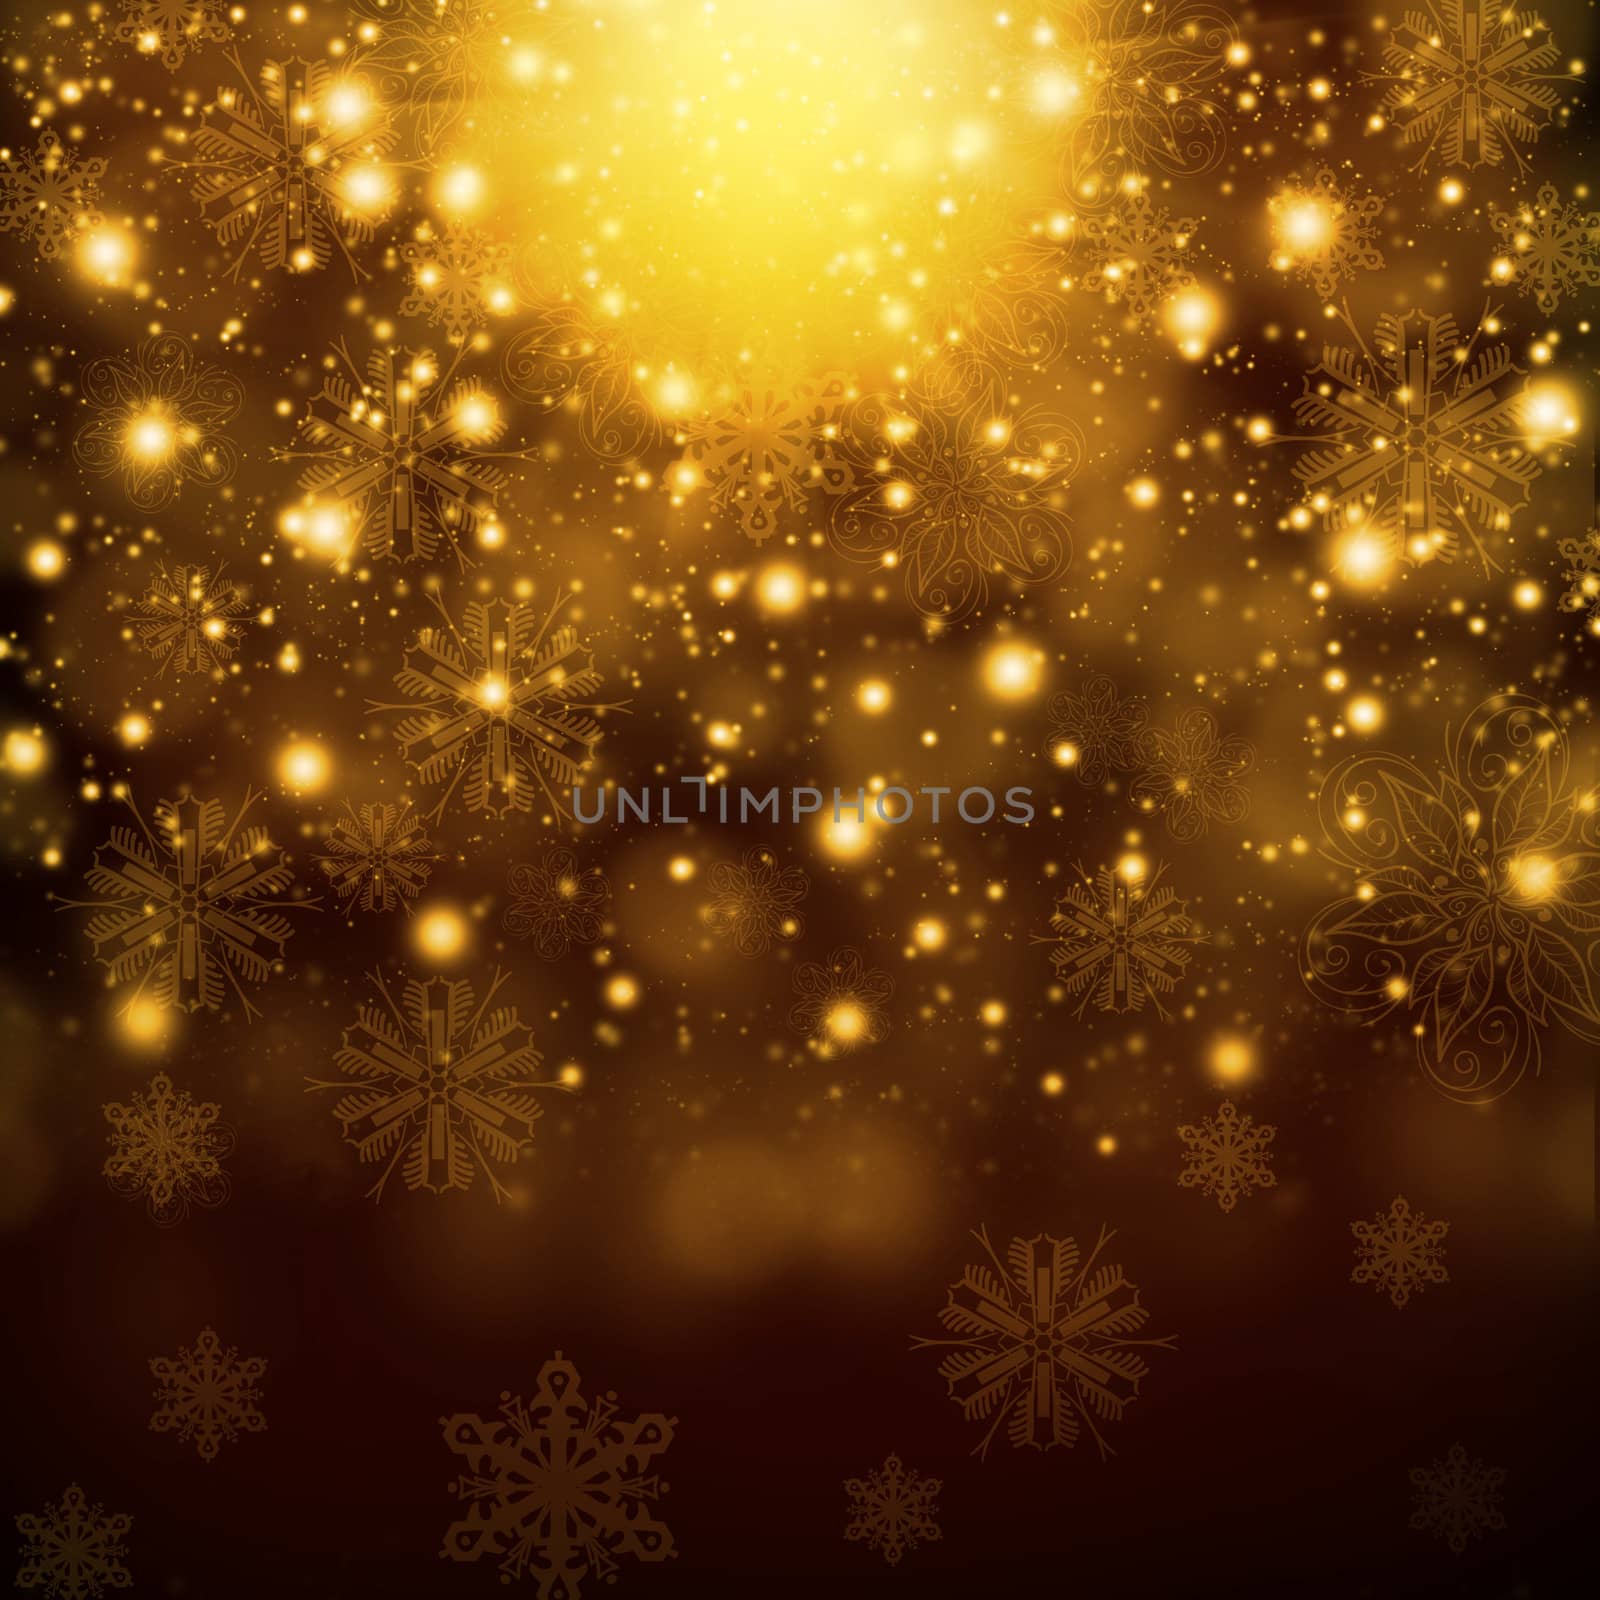 Snowflakes on abstract gold background by cherezoff